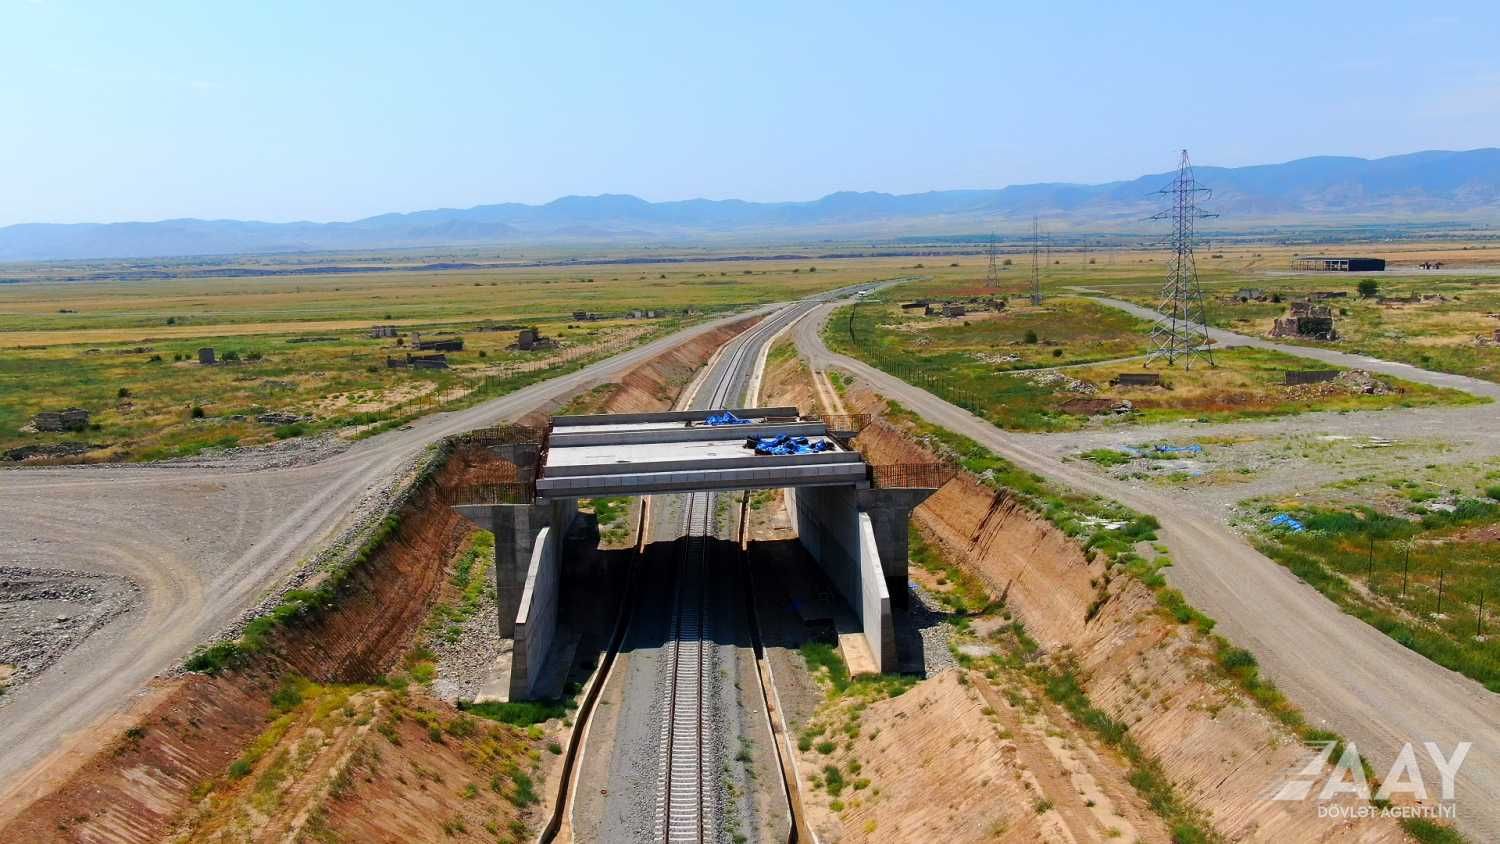 Construction of Aghdam-Fuzuli motorway continues at rapid pace [PHOTOS]
[VIDEO]